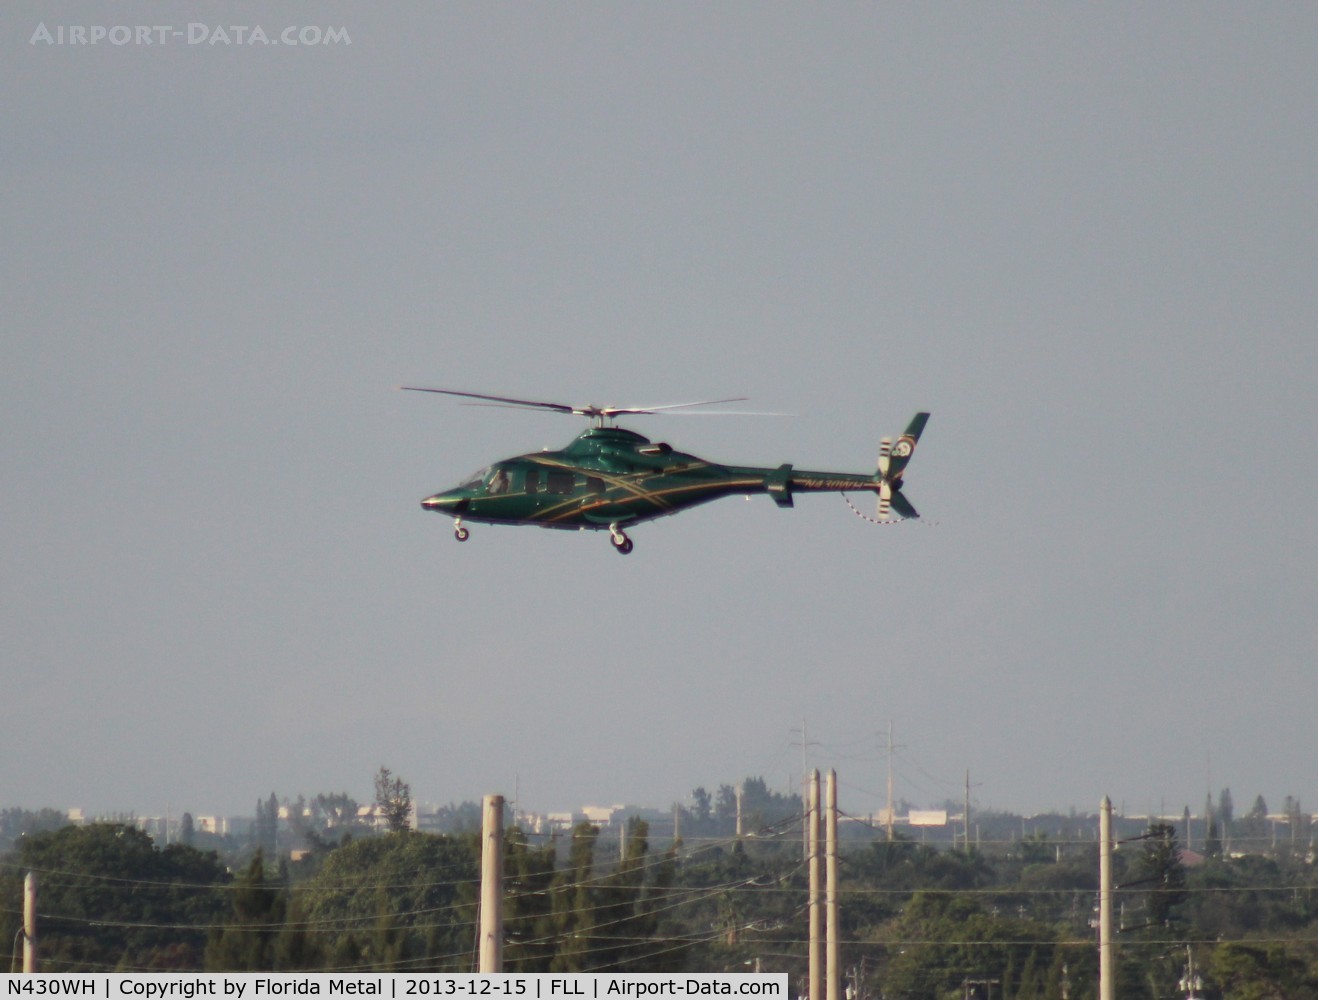 N430WH, 2006 Bell 430 C/N 49114, Miami Dolphins Bell 430